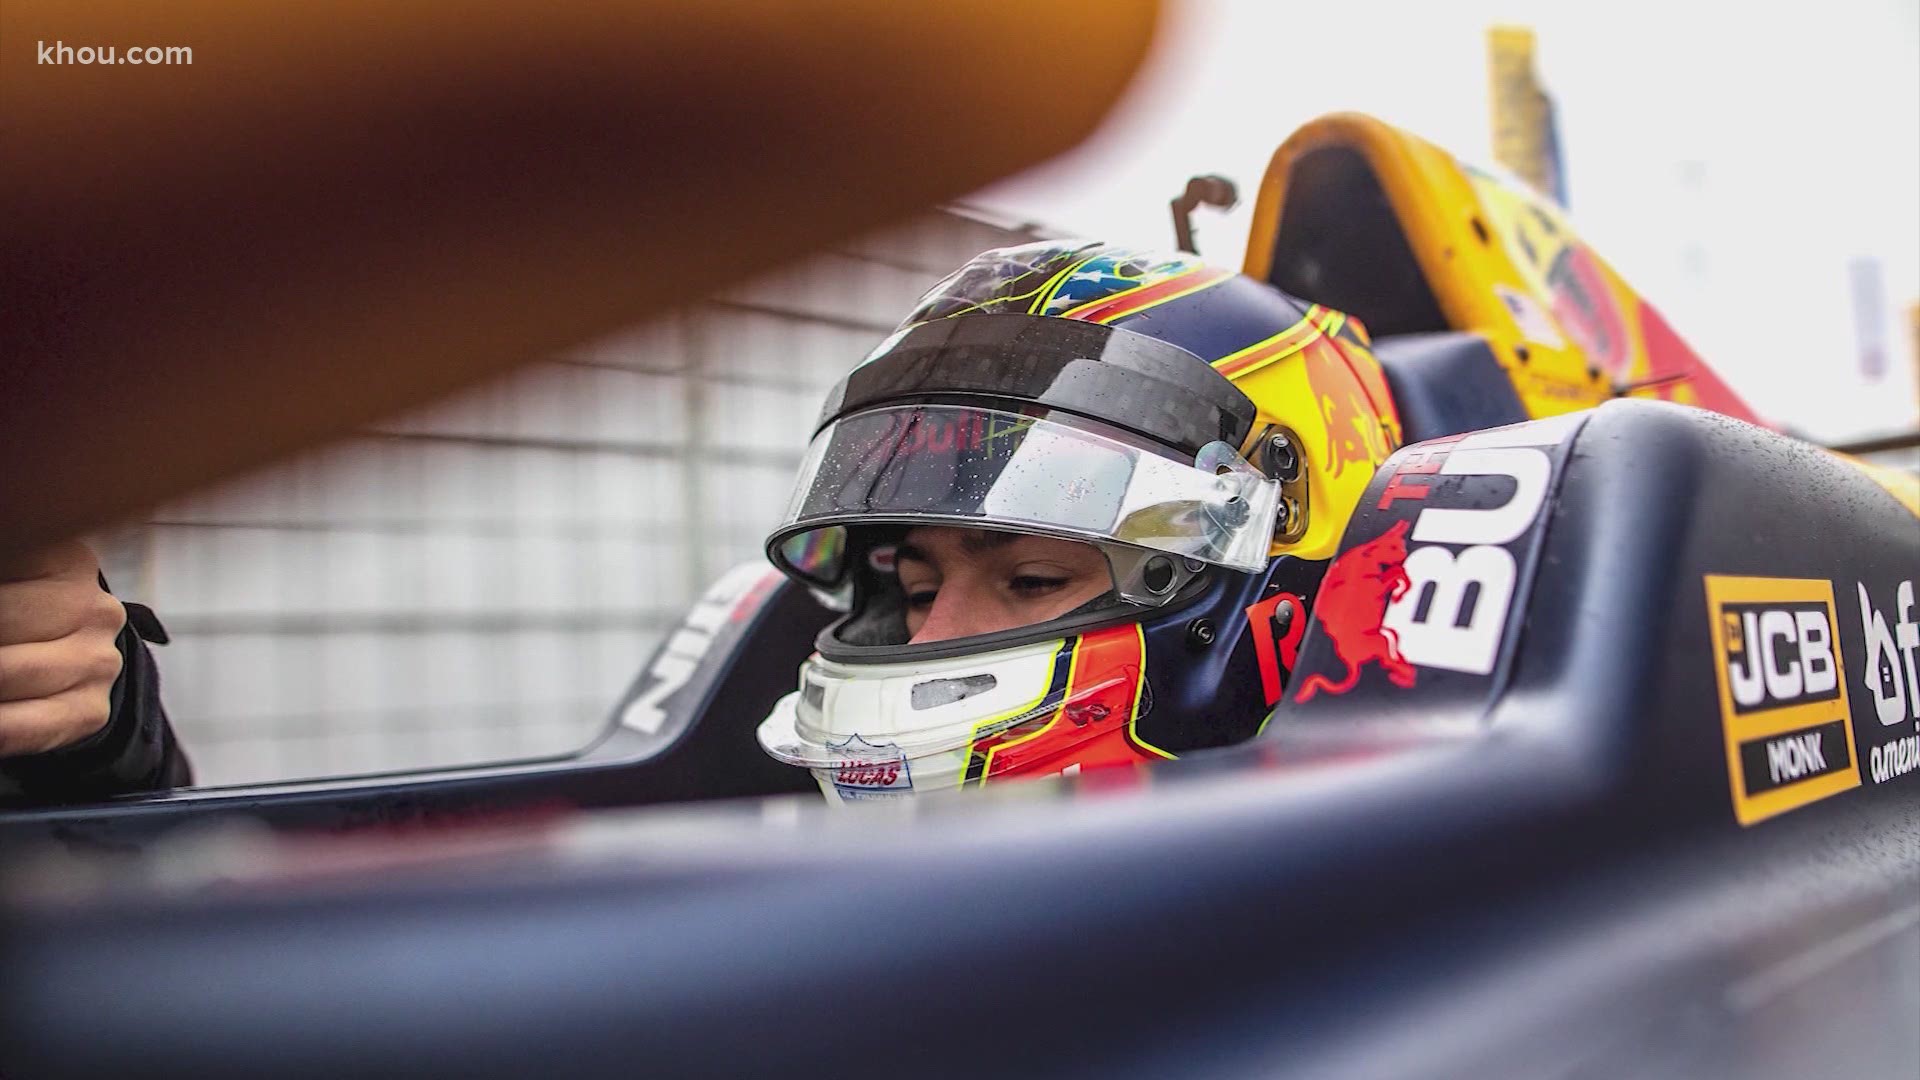 Is Americas next great Formula 1 driver a from The Woodlands? khou